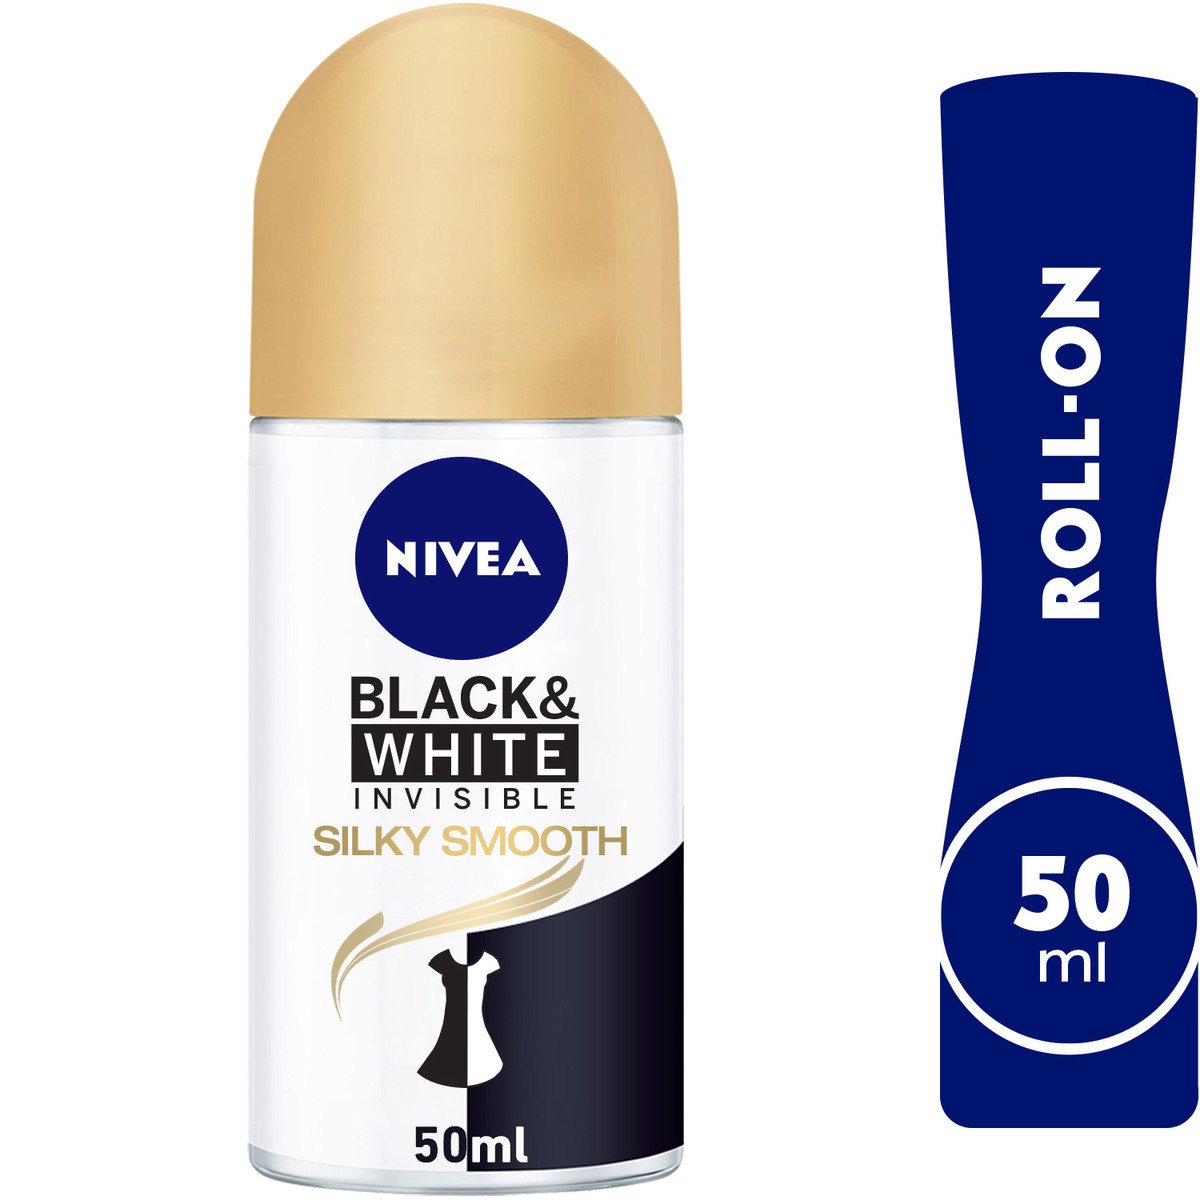 Nivea Black & White Anti-Perspirant for Women Roll On Invisible Silky Smooth 50 ml